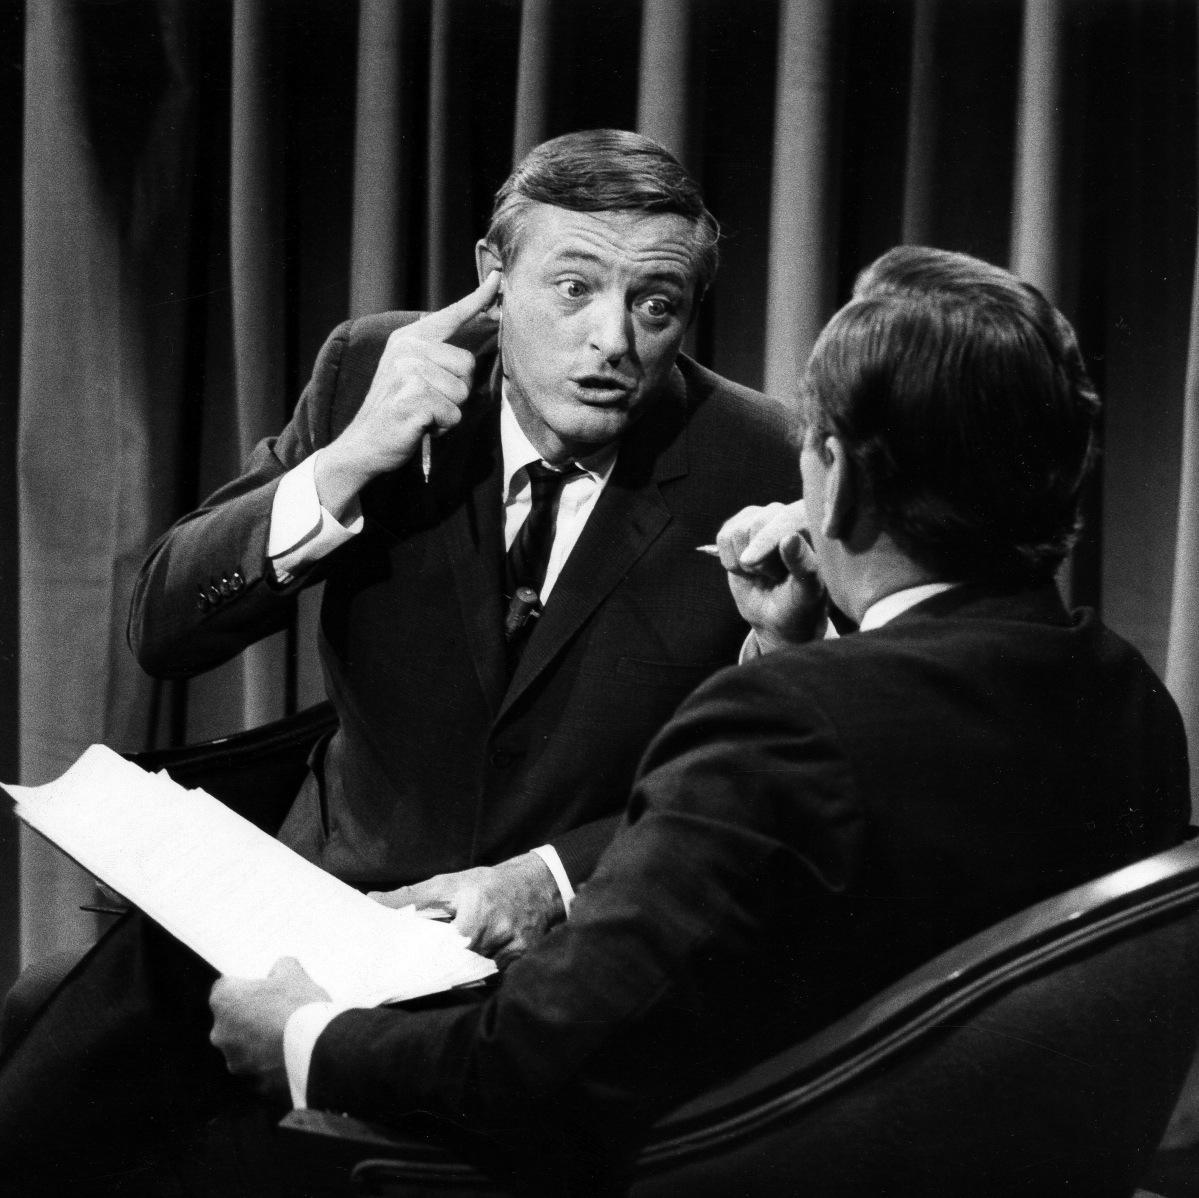 Directed by Morgan Neville and Robert Gordon, Best of Enemies is a documentary about the explosive 1968 debates between Gore Vidal and William F. Buckley Jr.